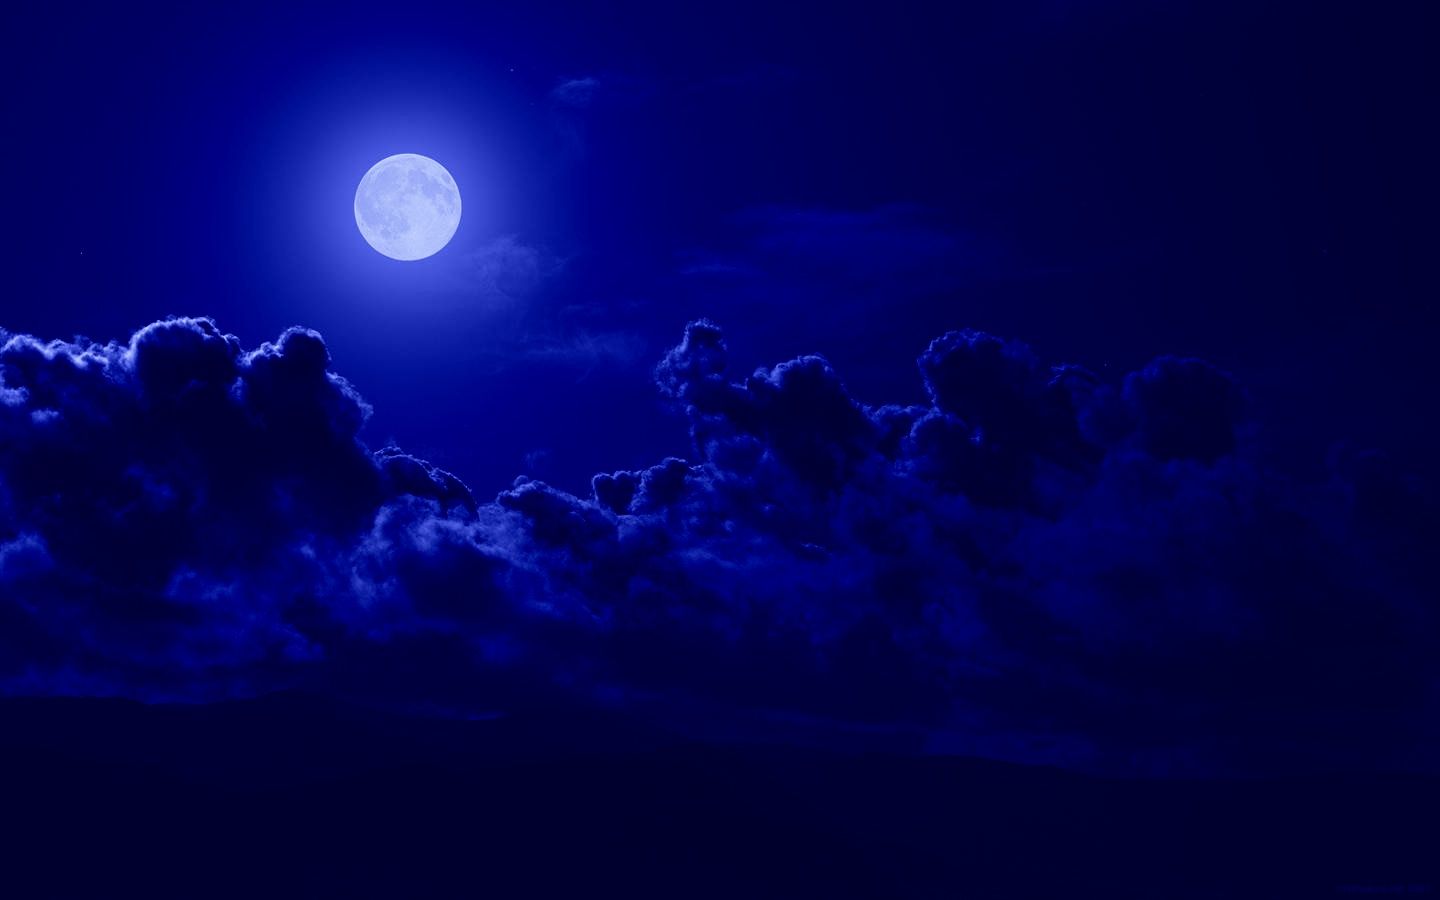 Top Sky Blue Night Images for Pinterest